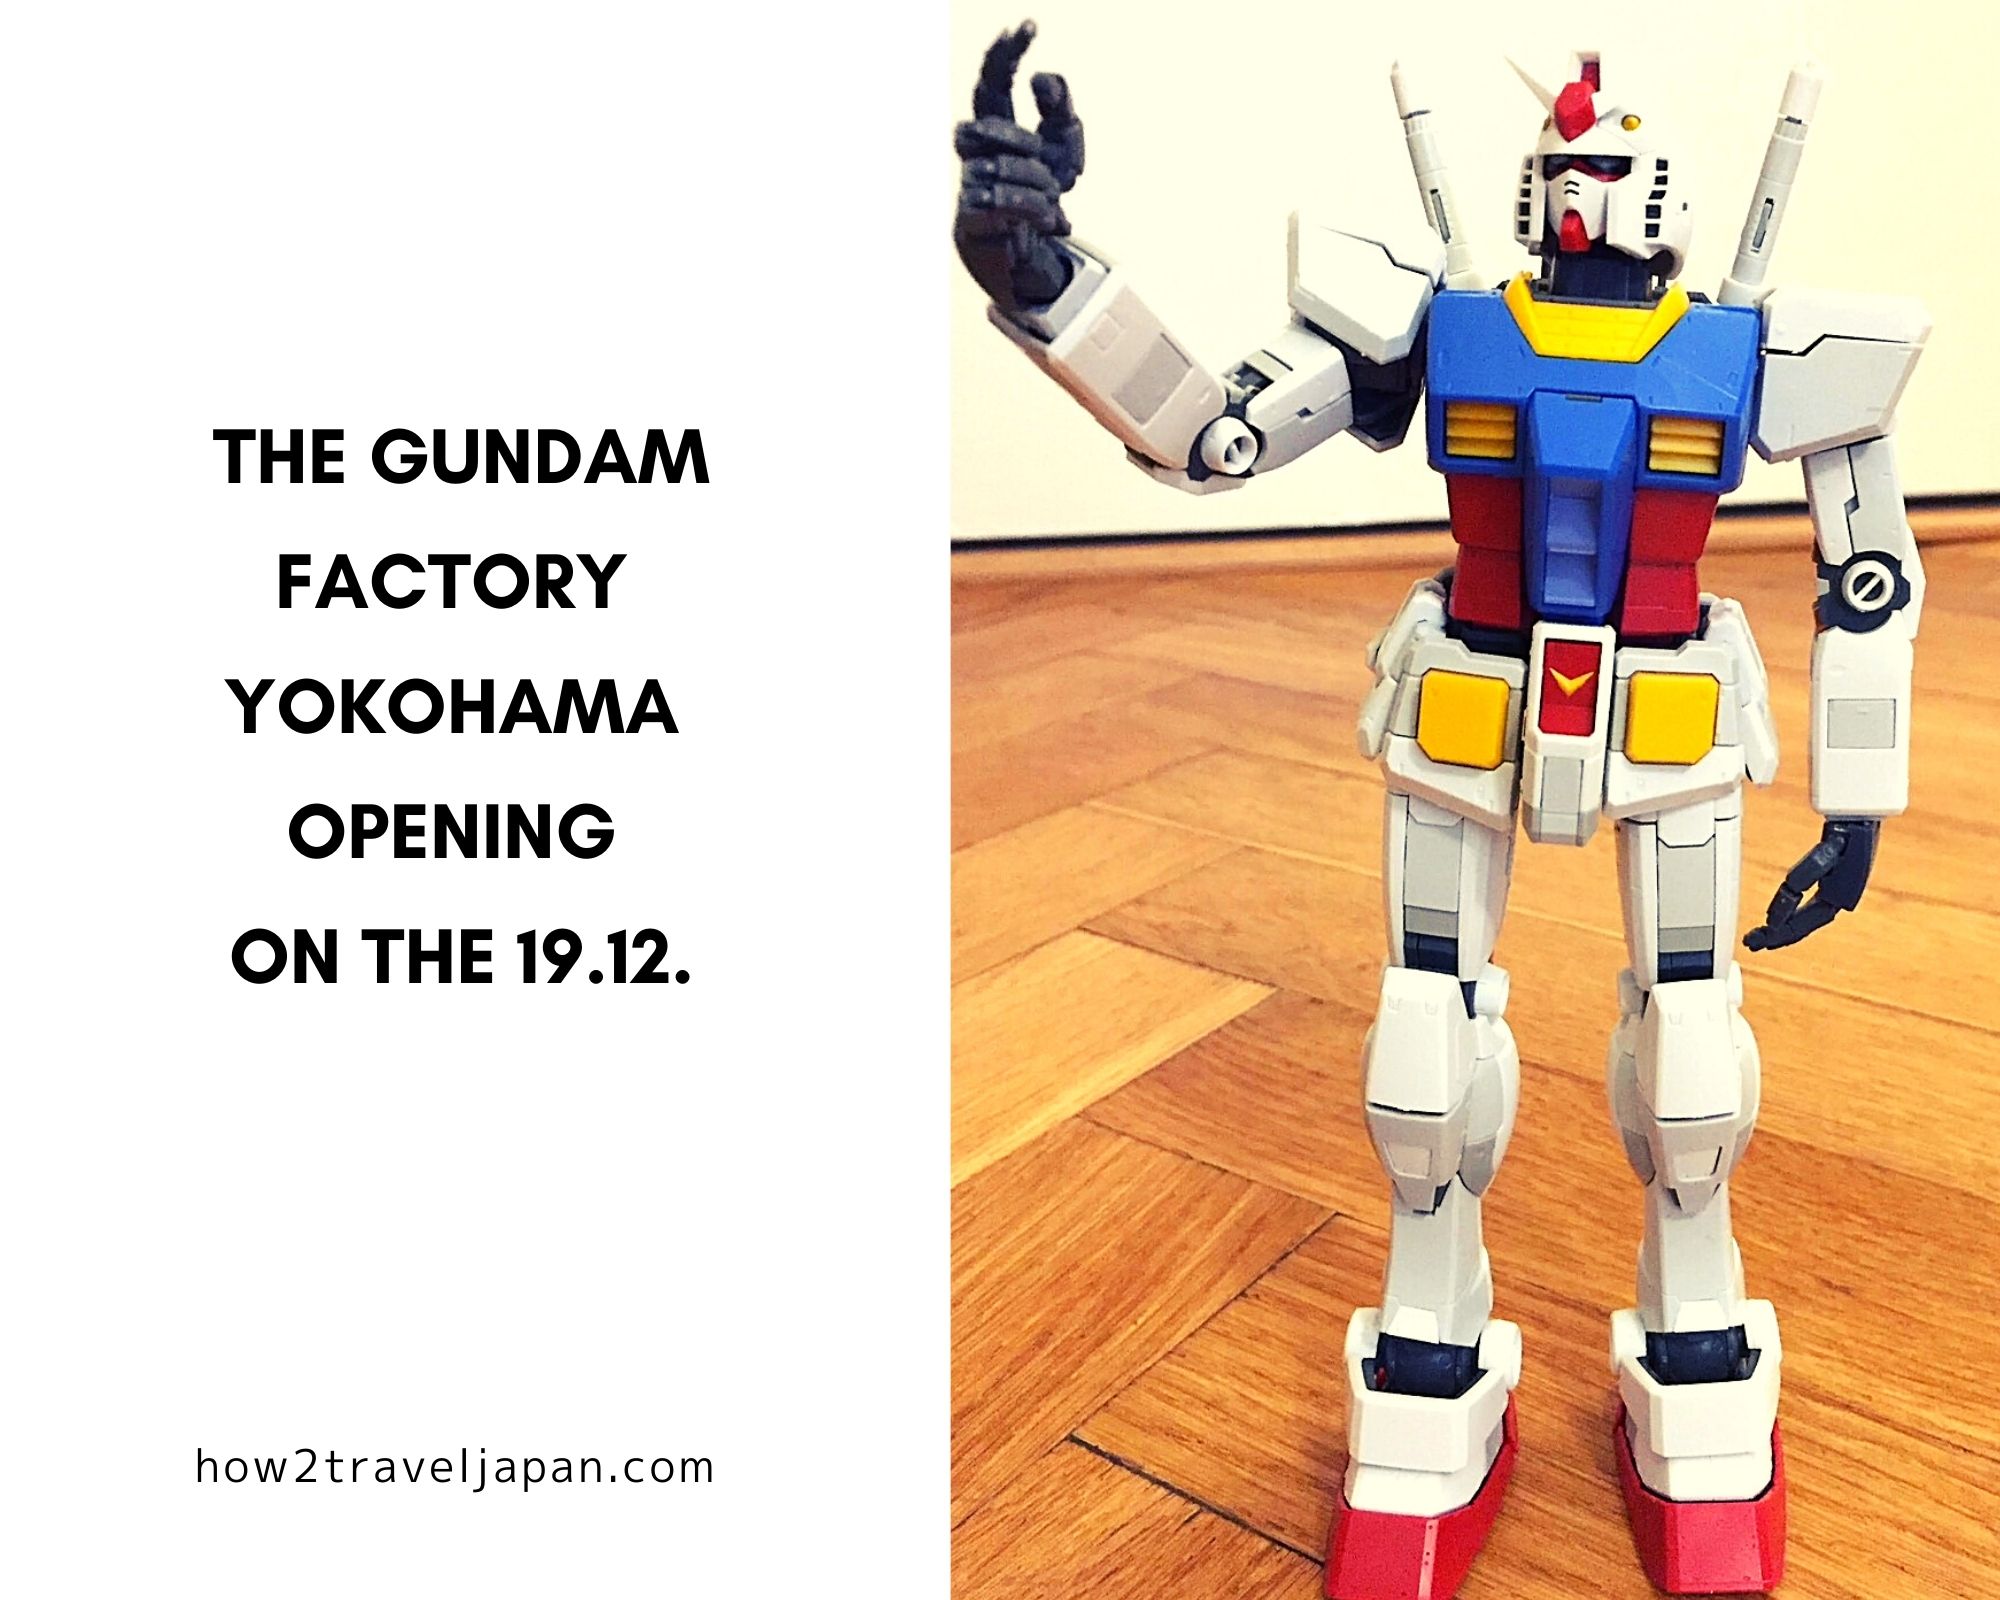 You are currently viewing The GUNDAM FACTORY YOKOHAMA, the latest opening is planned on the 19.12.2020.